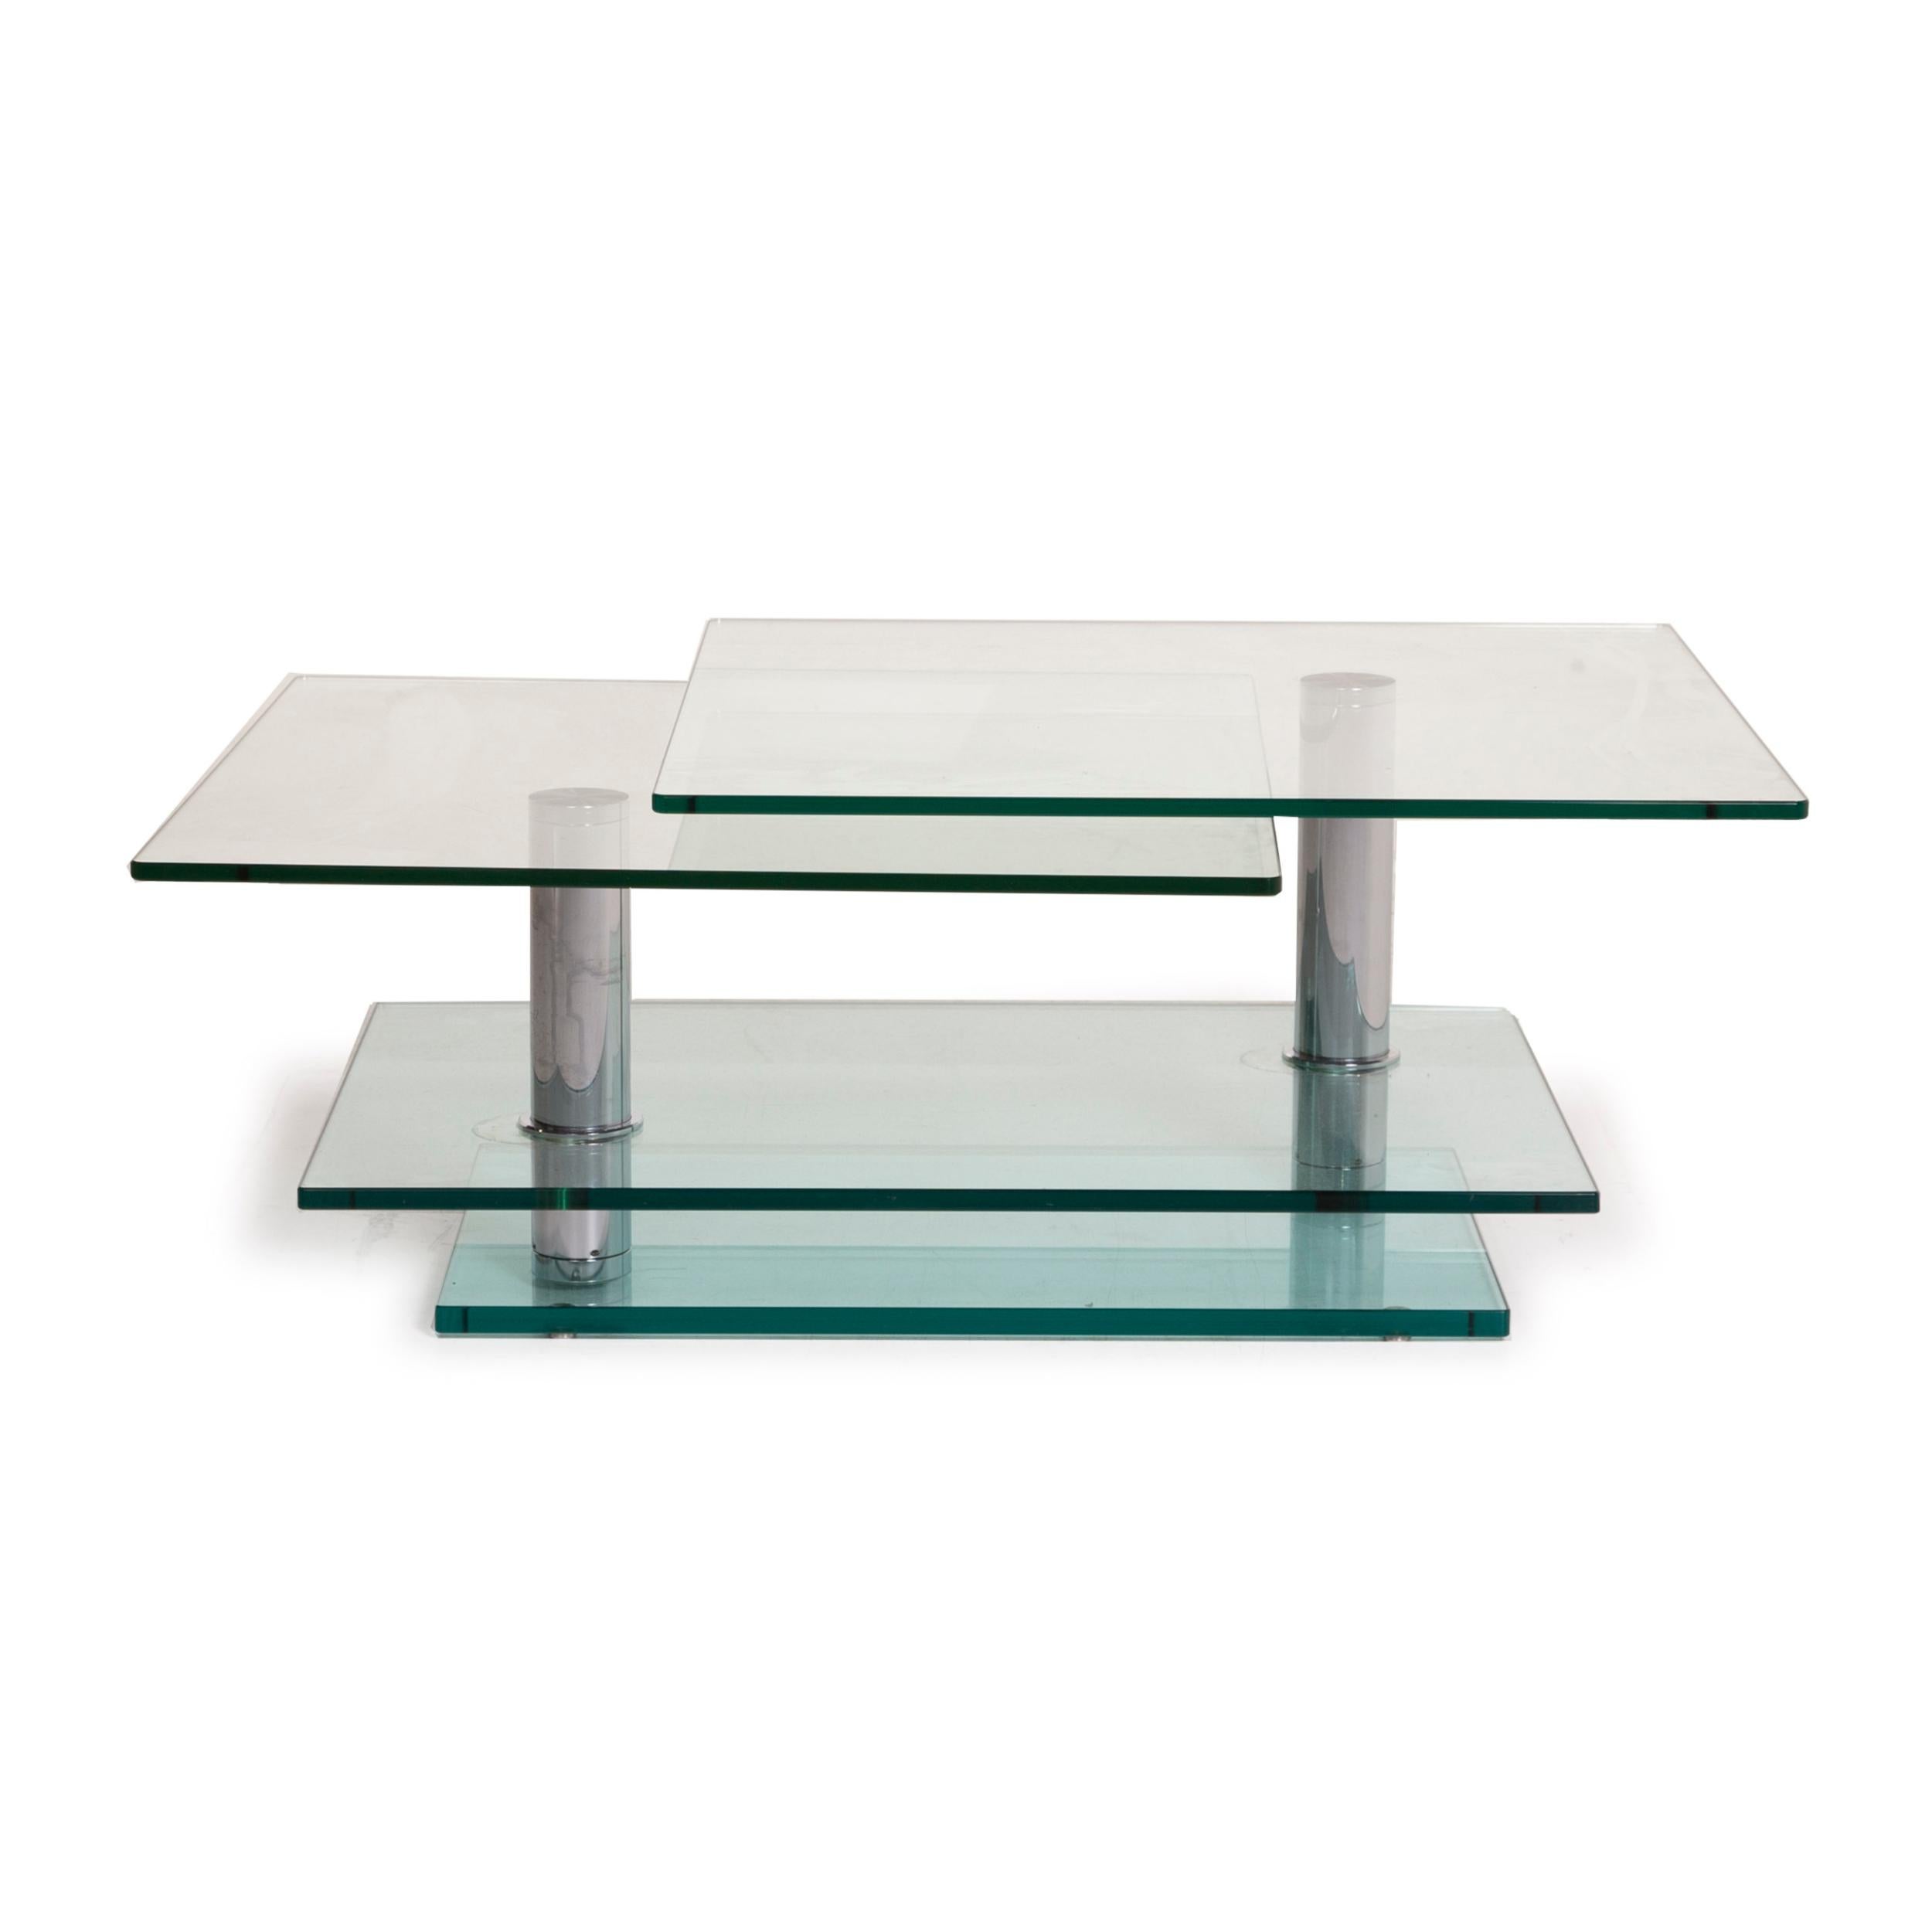 Ronald Schmitt K500 Glass Table Coffee Table Chrome Function In Fair Condition For Sale In Cologne, DE